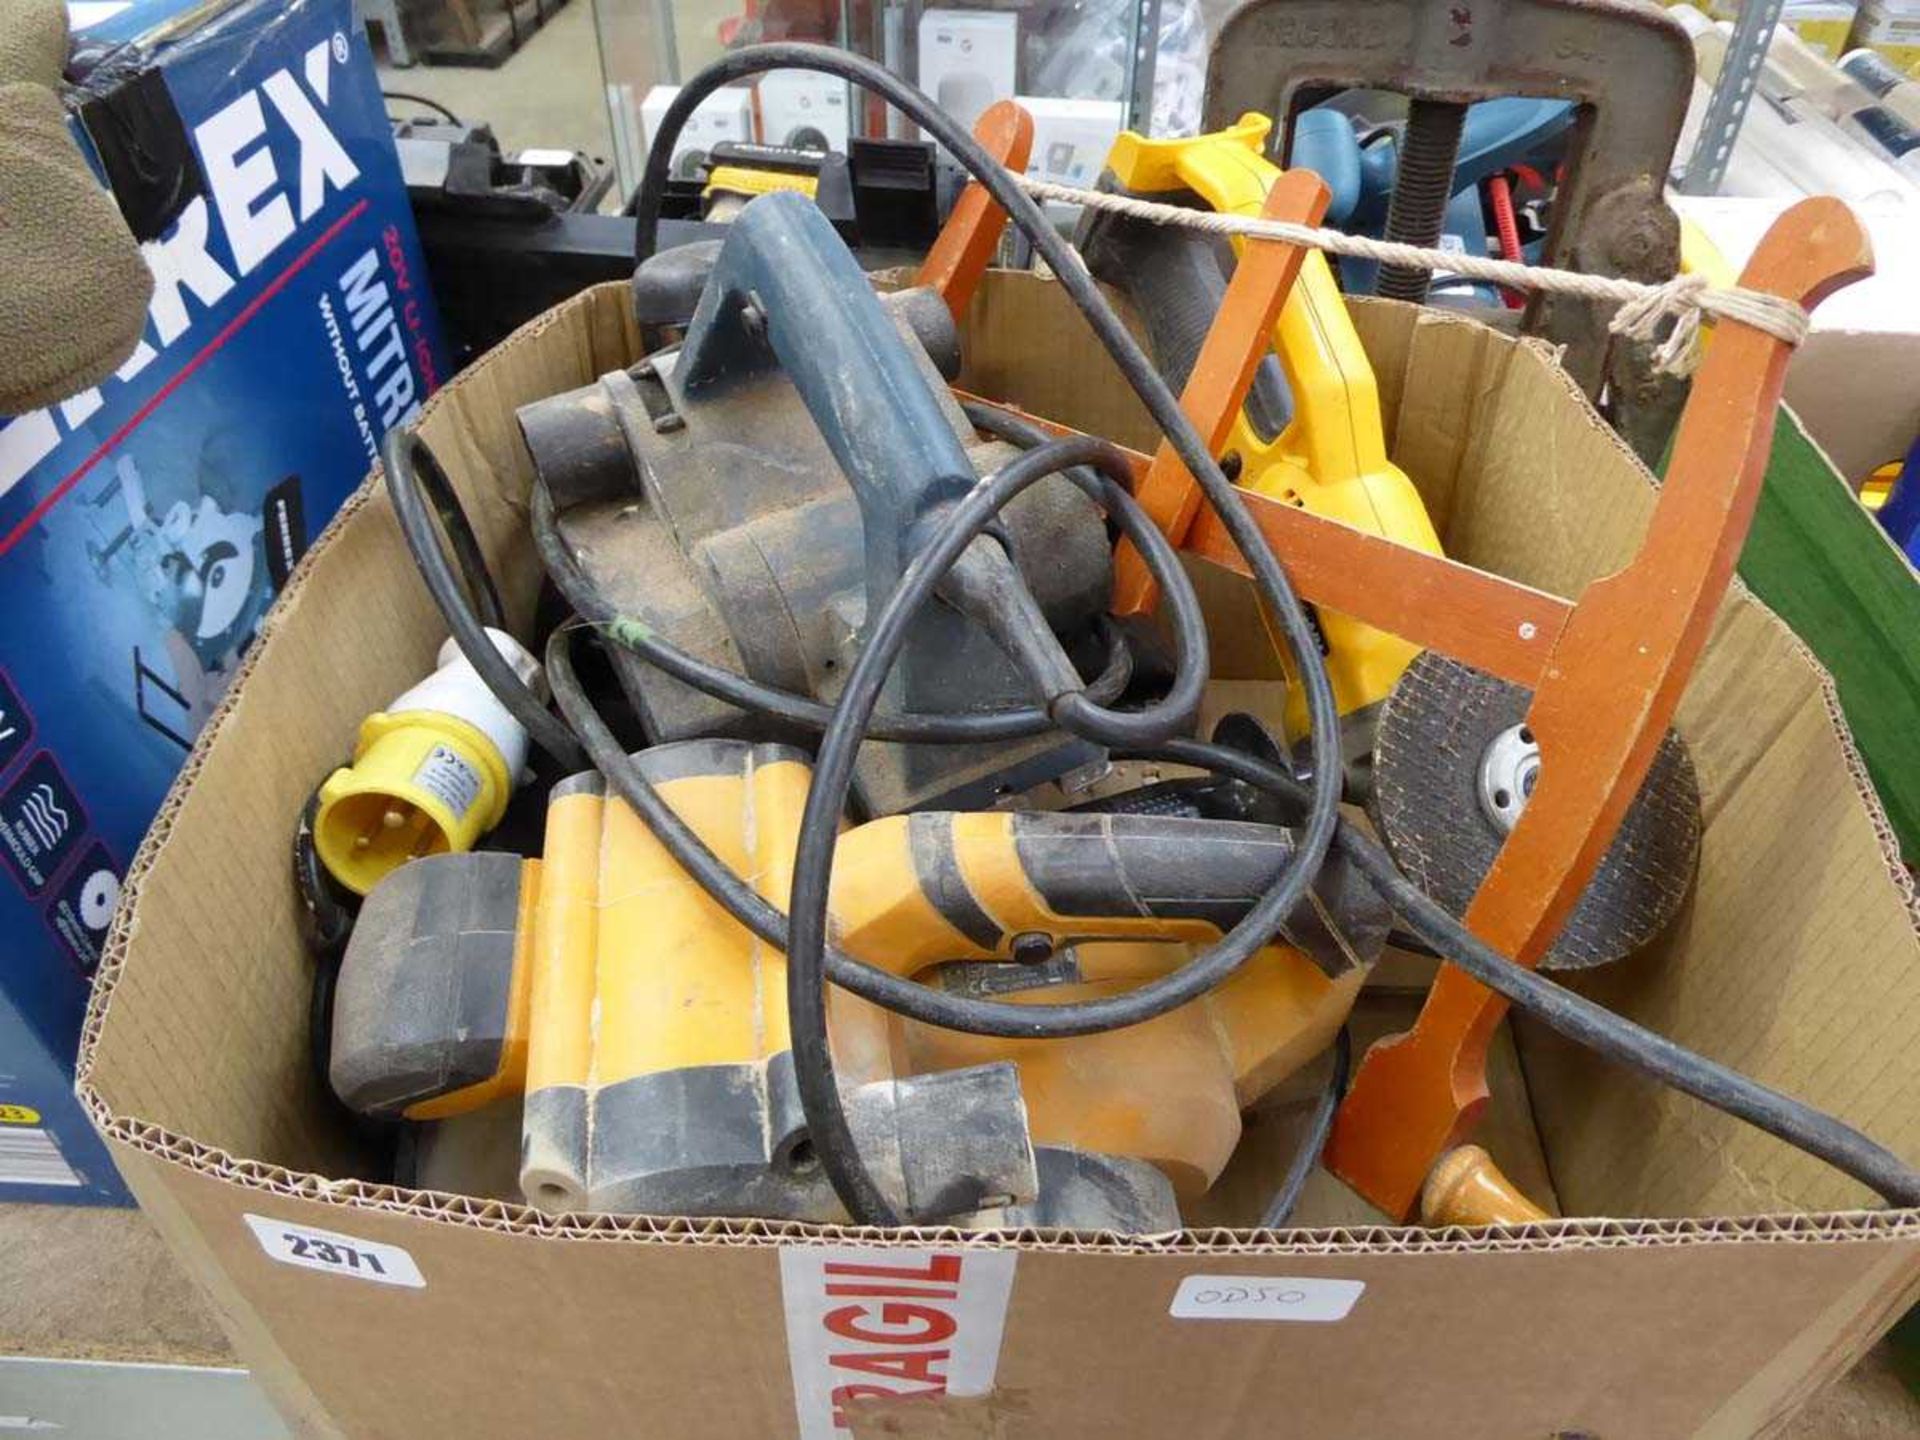 Crate containing mixed tooling incl. electric planers, angle grinder, etc.